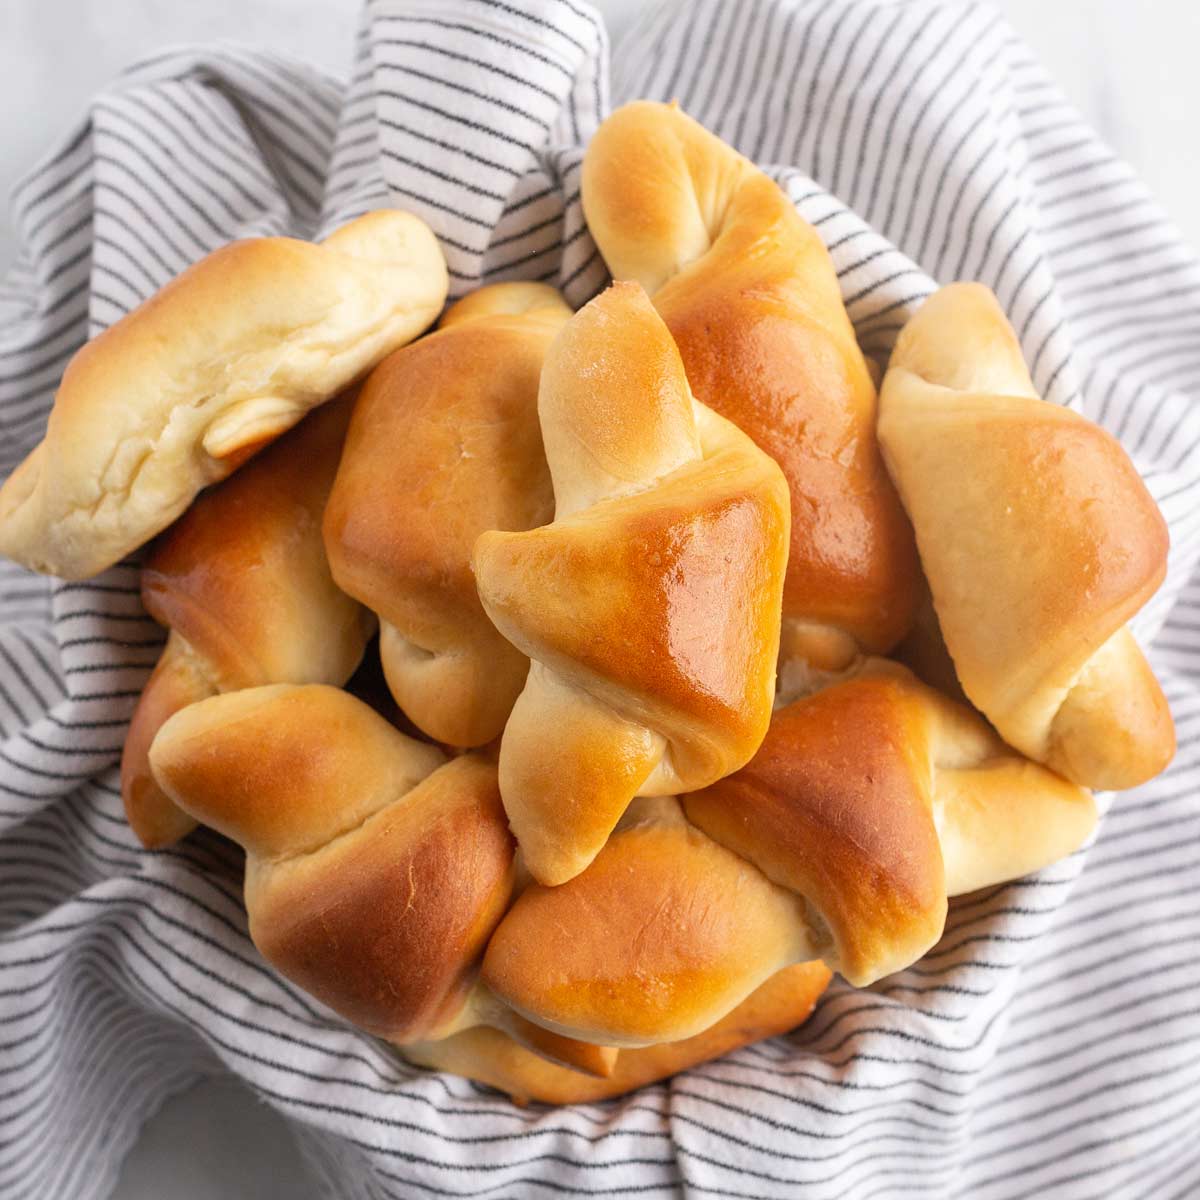 Homemade Crescent Rolls (make ahead options) - The Chunky Chef